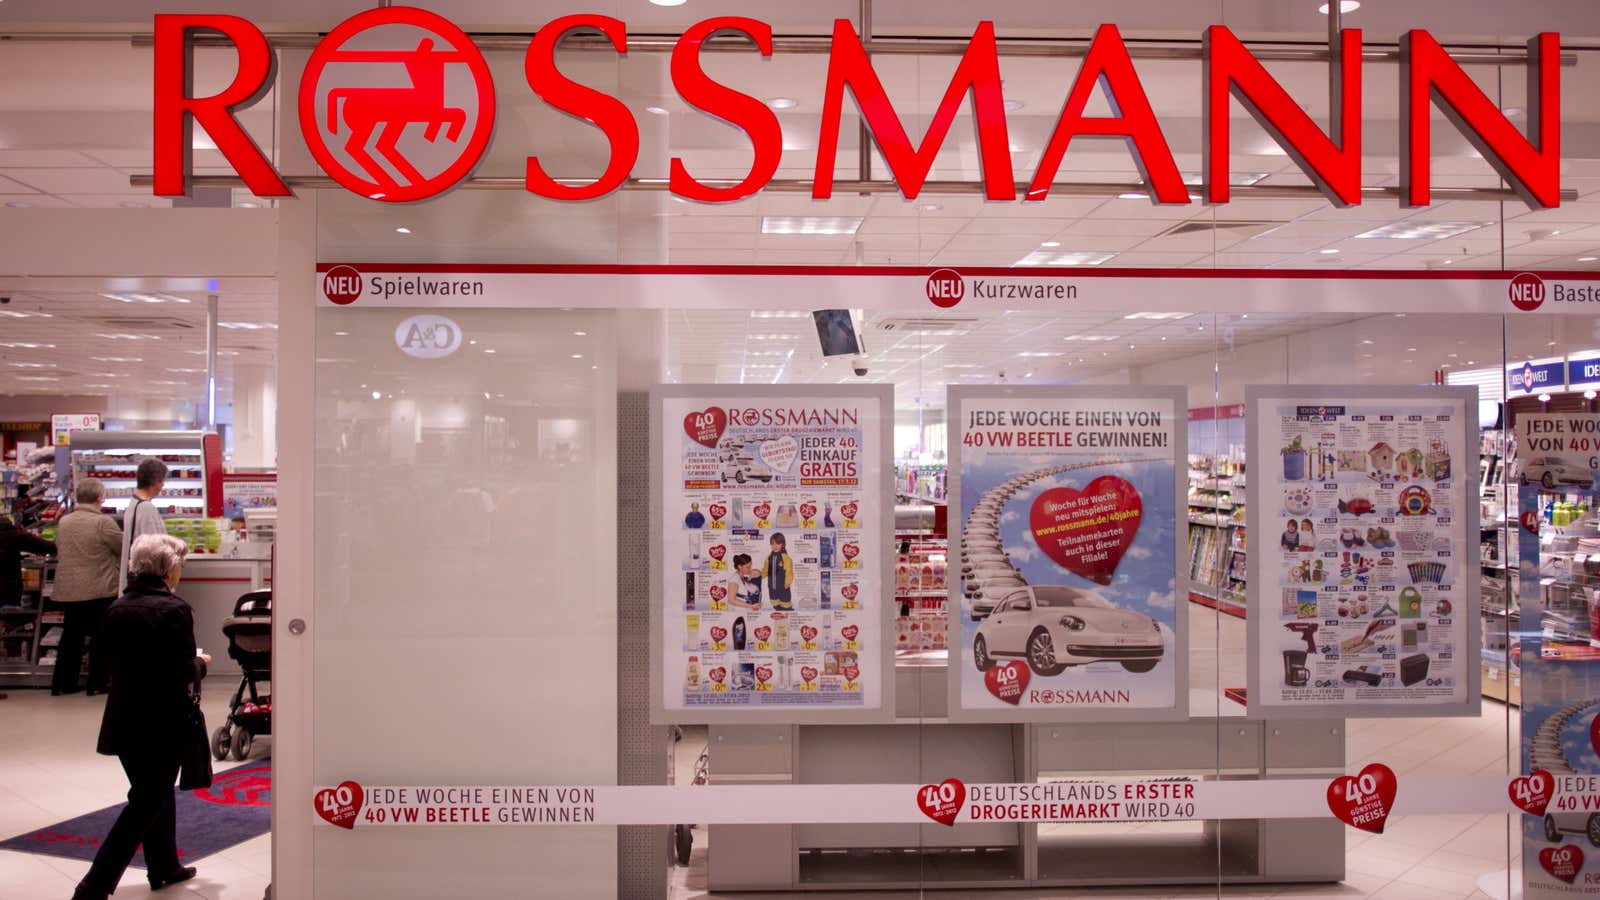 German drugstore Rossmann is outraged over exorbitant new public broadcasting fees places on companies.